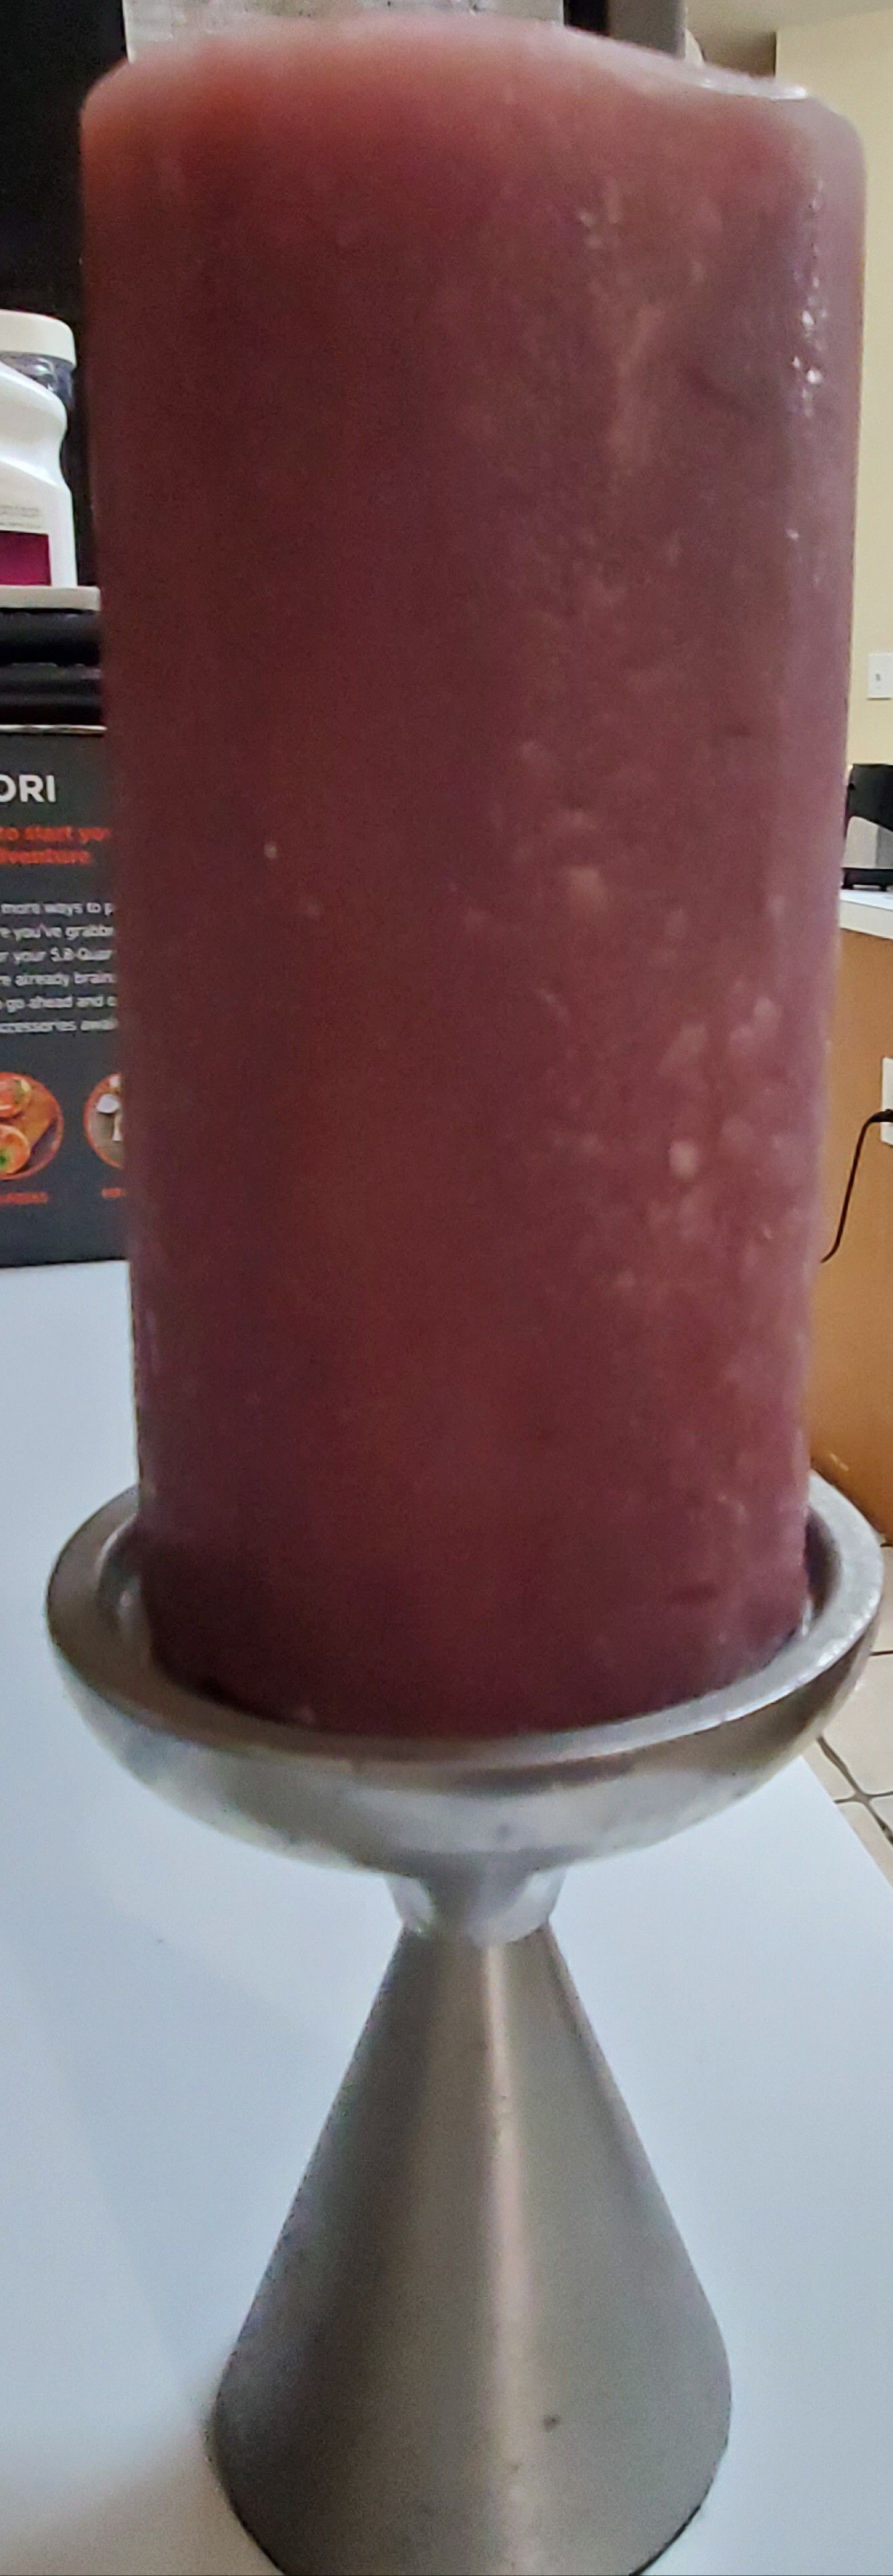 Purple pillar candle on nickel base. Never used or has been burned. Display only.